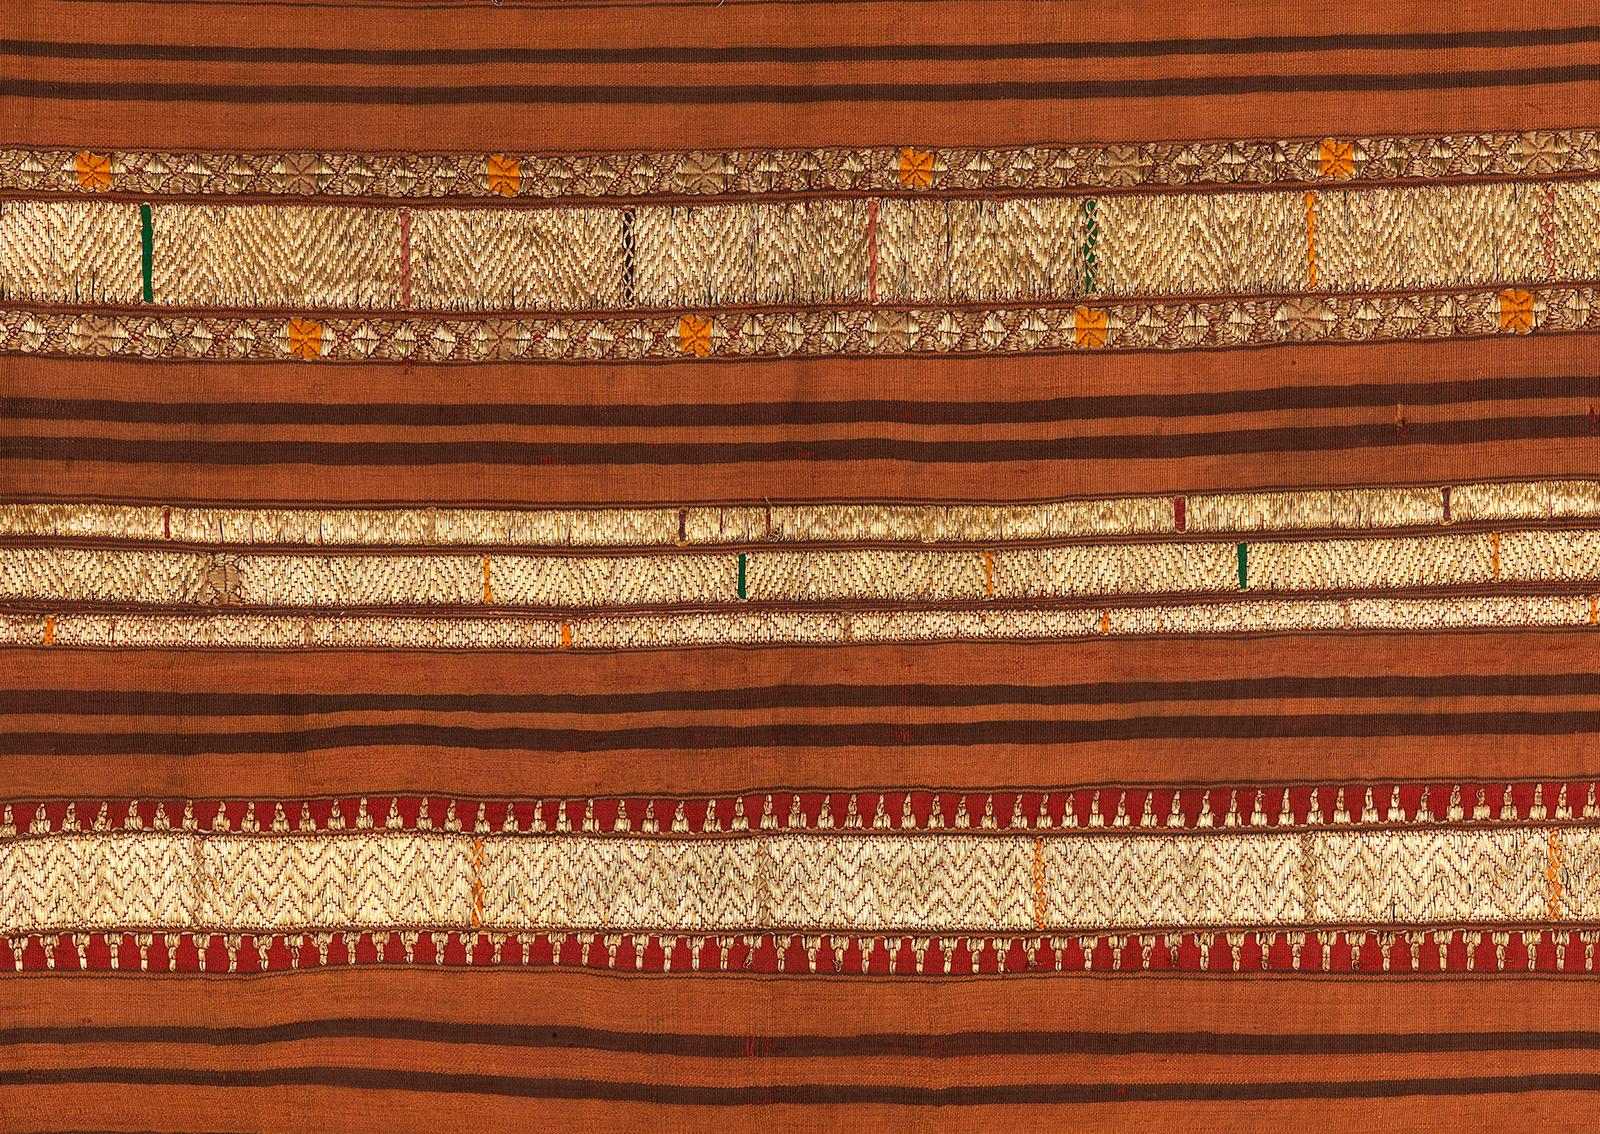 Tapis, Woman’s Ceremonial Skirt
Paminggir people, Lampung, Sumatra, Indonesia
Late 19th or early 20th century
Silk, metallic thread, handspun cotton, natural and synthetic imported dyes, embroidery
46.5 x 23.25 inches  (118 x 59 cm)
